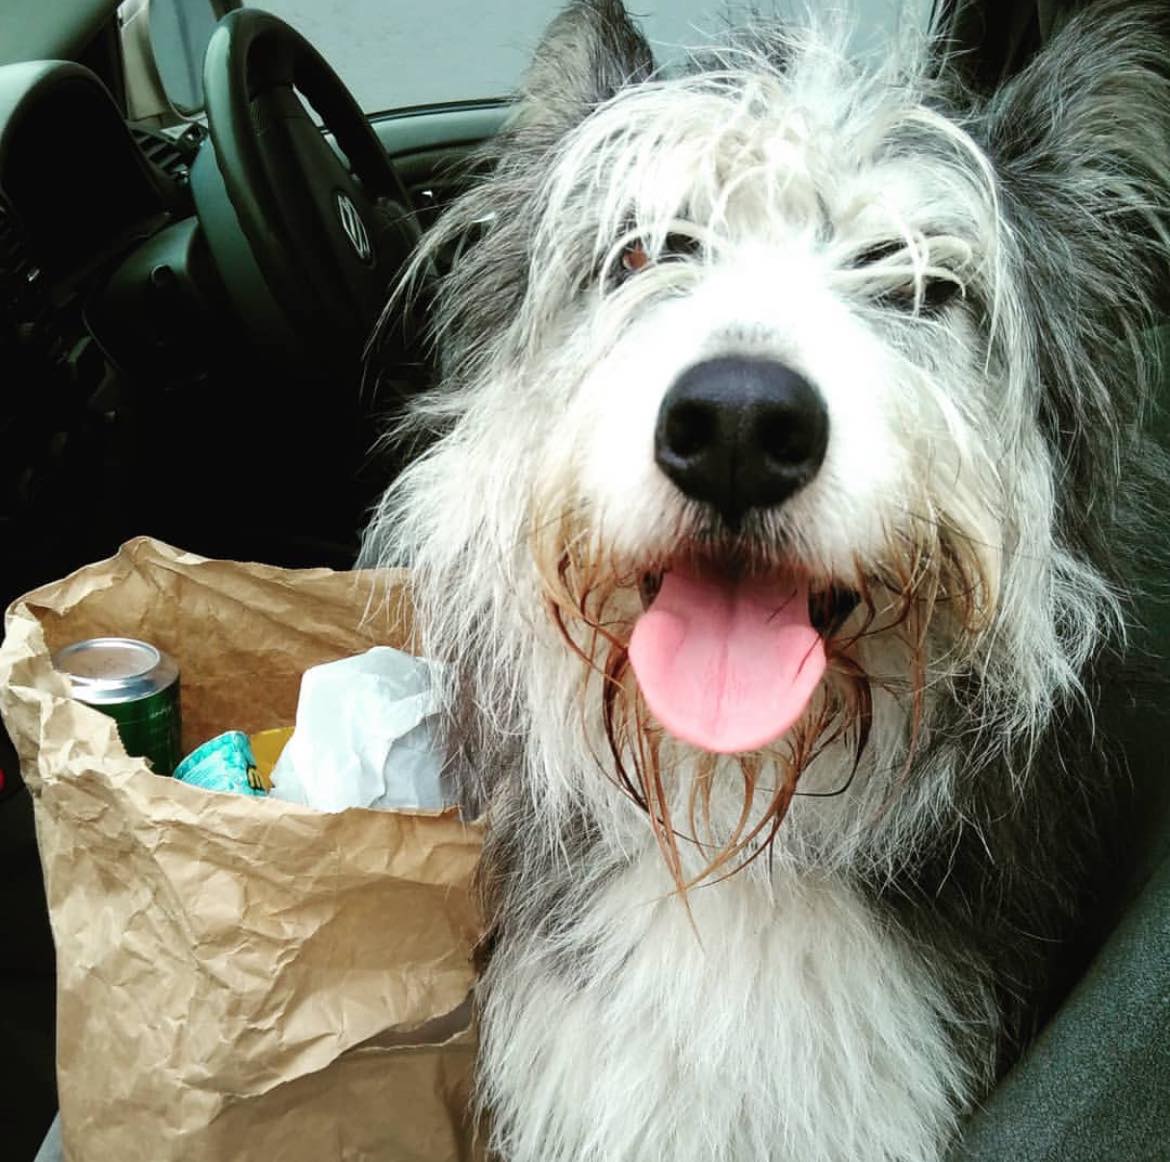 Molly Aylesbury did a dedicated #SpringClean24 during #EarthDay with her four legged friend and encouraged peopleif they were short on time, to take part in a #2MinuteStreetClean. Great work 🐶💚

#SDGsIrl #NationalSpringClean